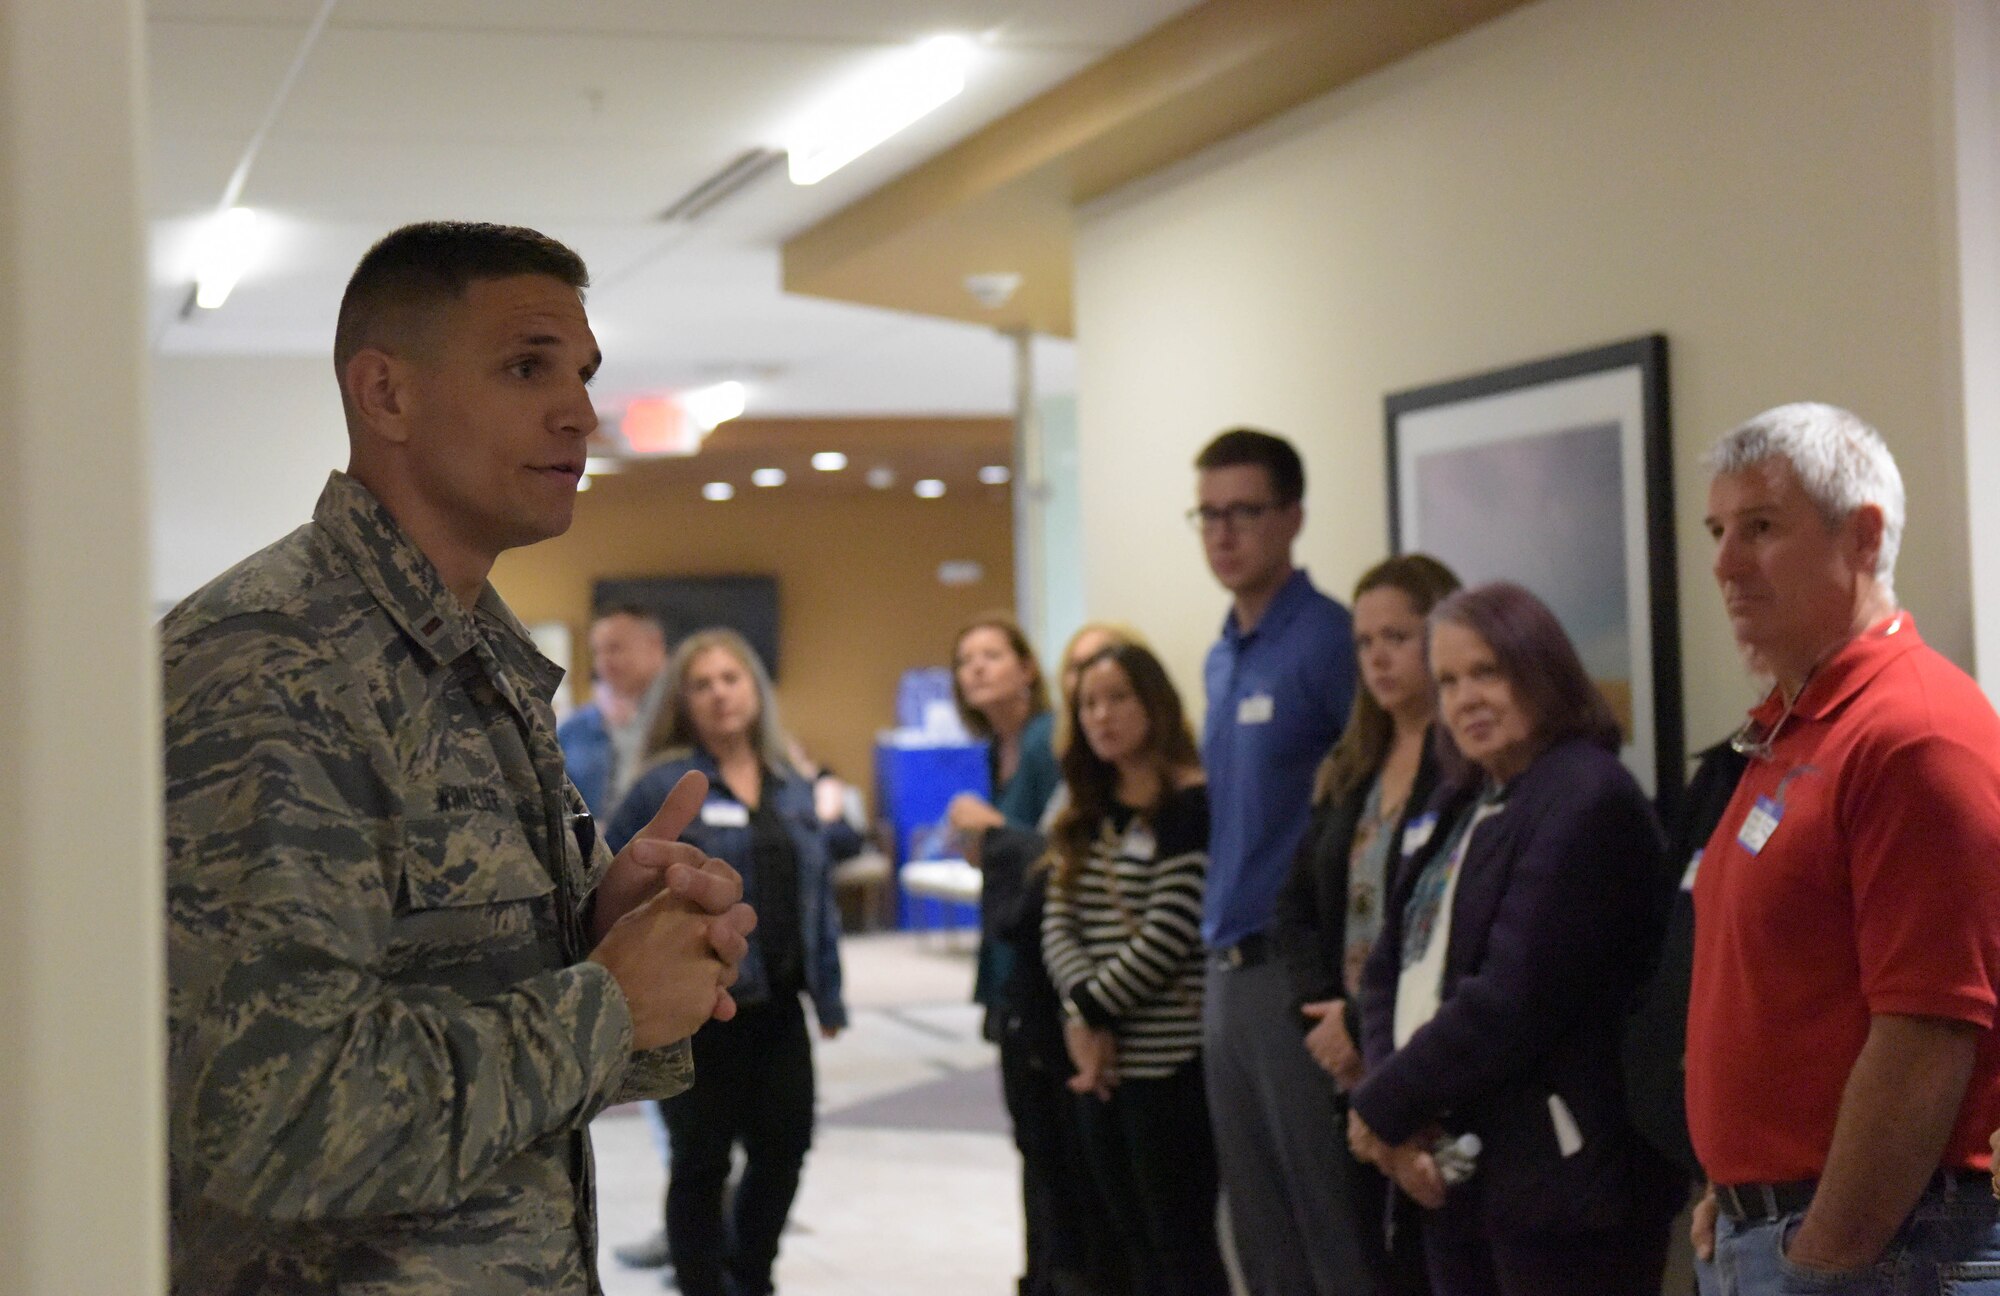 2nd Lt. Shawn Winkeler, Tricare operations and patient administration flight commander from the 509th Medical Group, gives local Tricare network providers a base of the clinic Oct. 19, 2018 at Whiteman Air Force Base, Missouri. The 509th MDG provides trusted medical support, community health and wellness and develops and sustains mission-ready medics to support Combatant and Joint Force Commanders. The group also provides health services for more than 12,000 beneficiaries. (U.S. Air Force photo by Staff Sgt. Joel Pfiester)